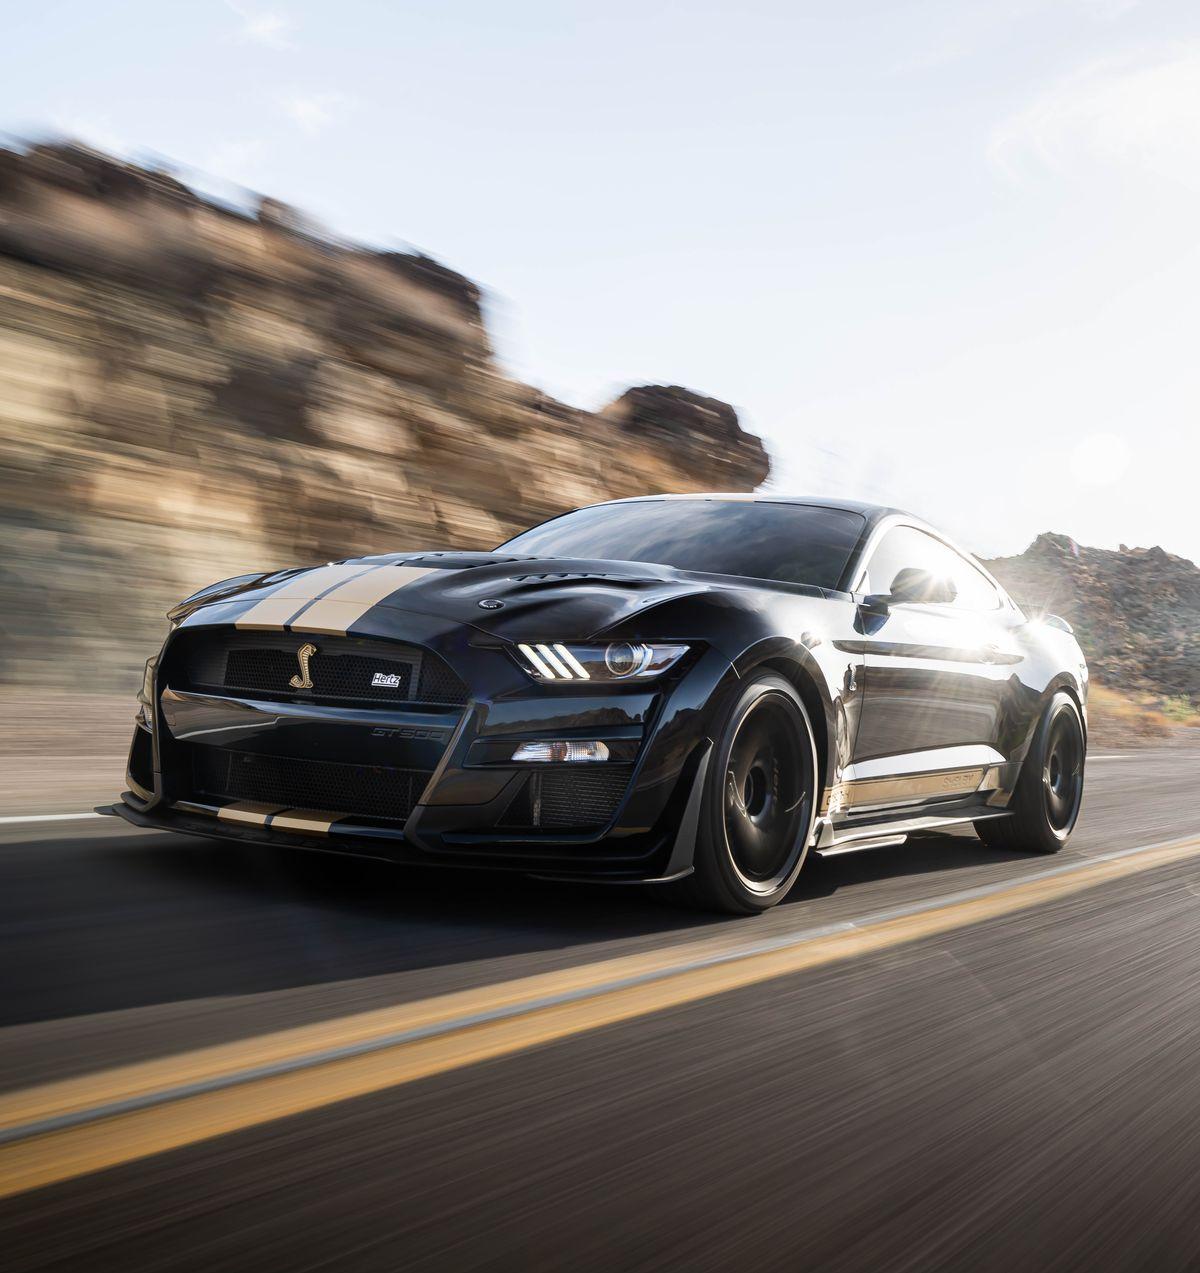 Shelby And Hertz Reveal Hp Mustang Gt500 H Rental Car